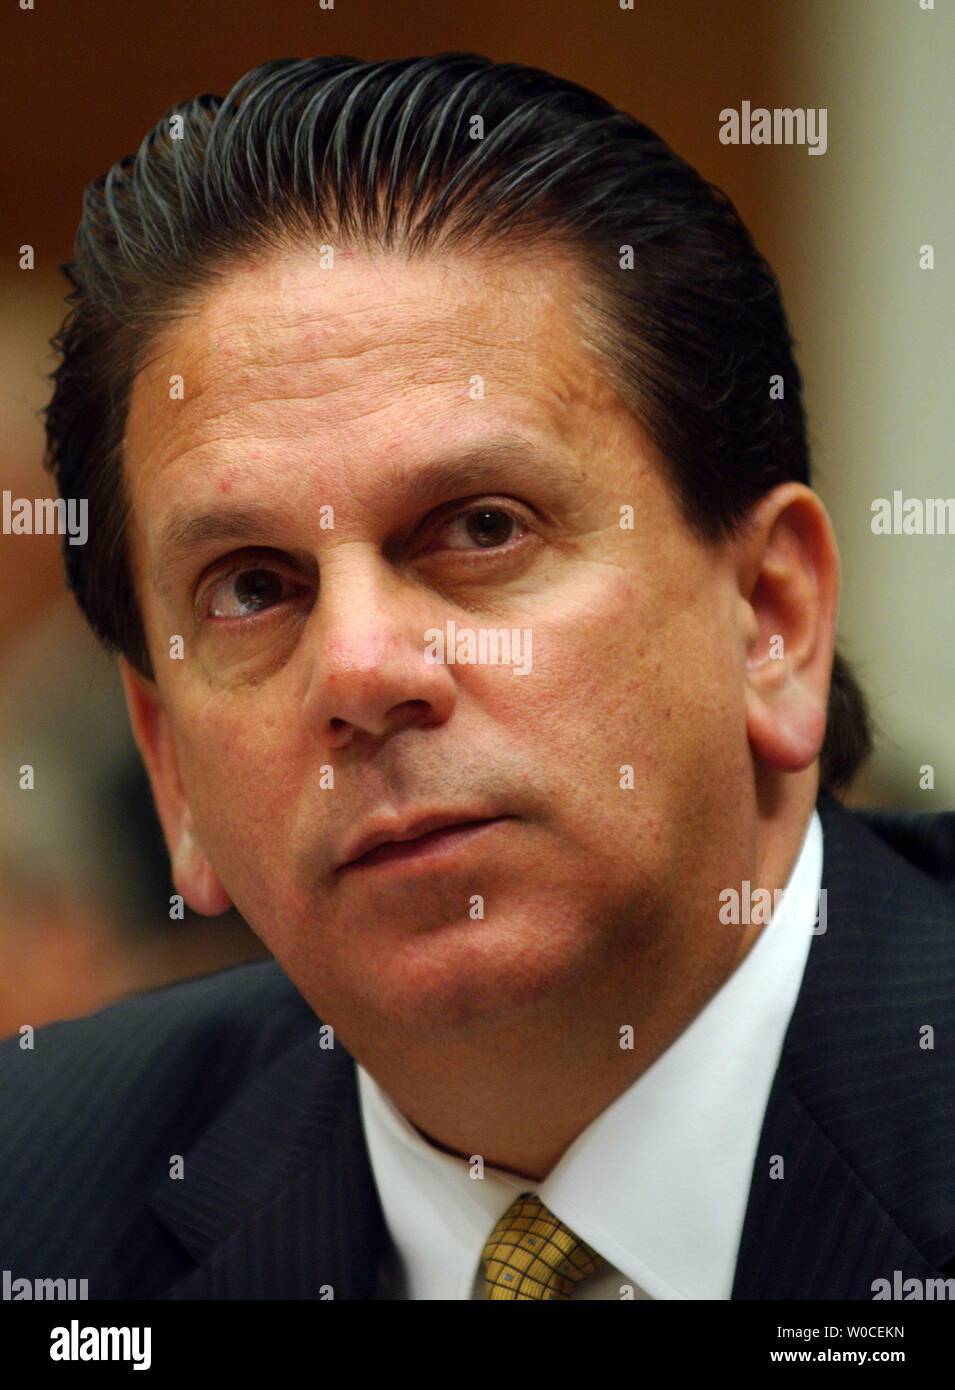 David Stone, Administrator of Transportation Security at the Department of Homeland Security testifies before the House Transportation and Infrastructure Committee regarding aviation security in a post 9/11 era, on August 25, 2004 in Washington. (UPI Photo/Michael Kleinfeld) Stock Photo